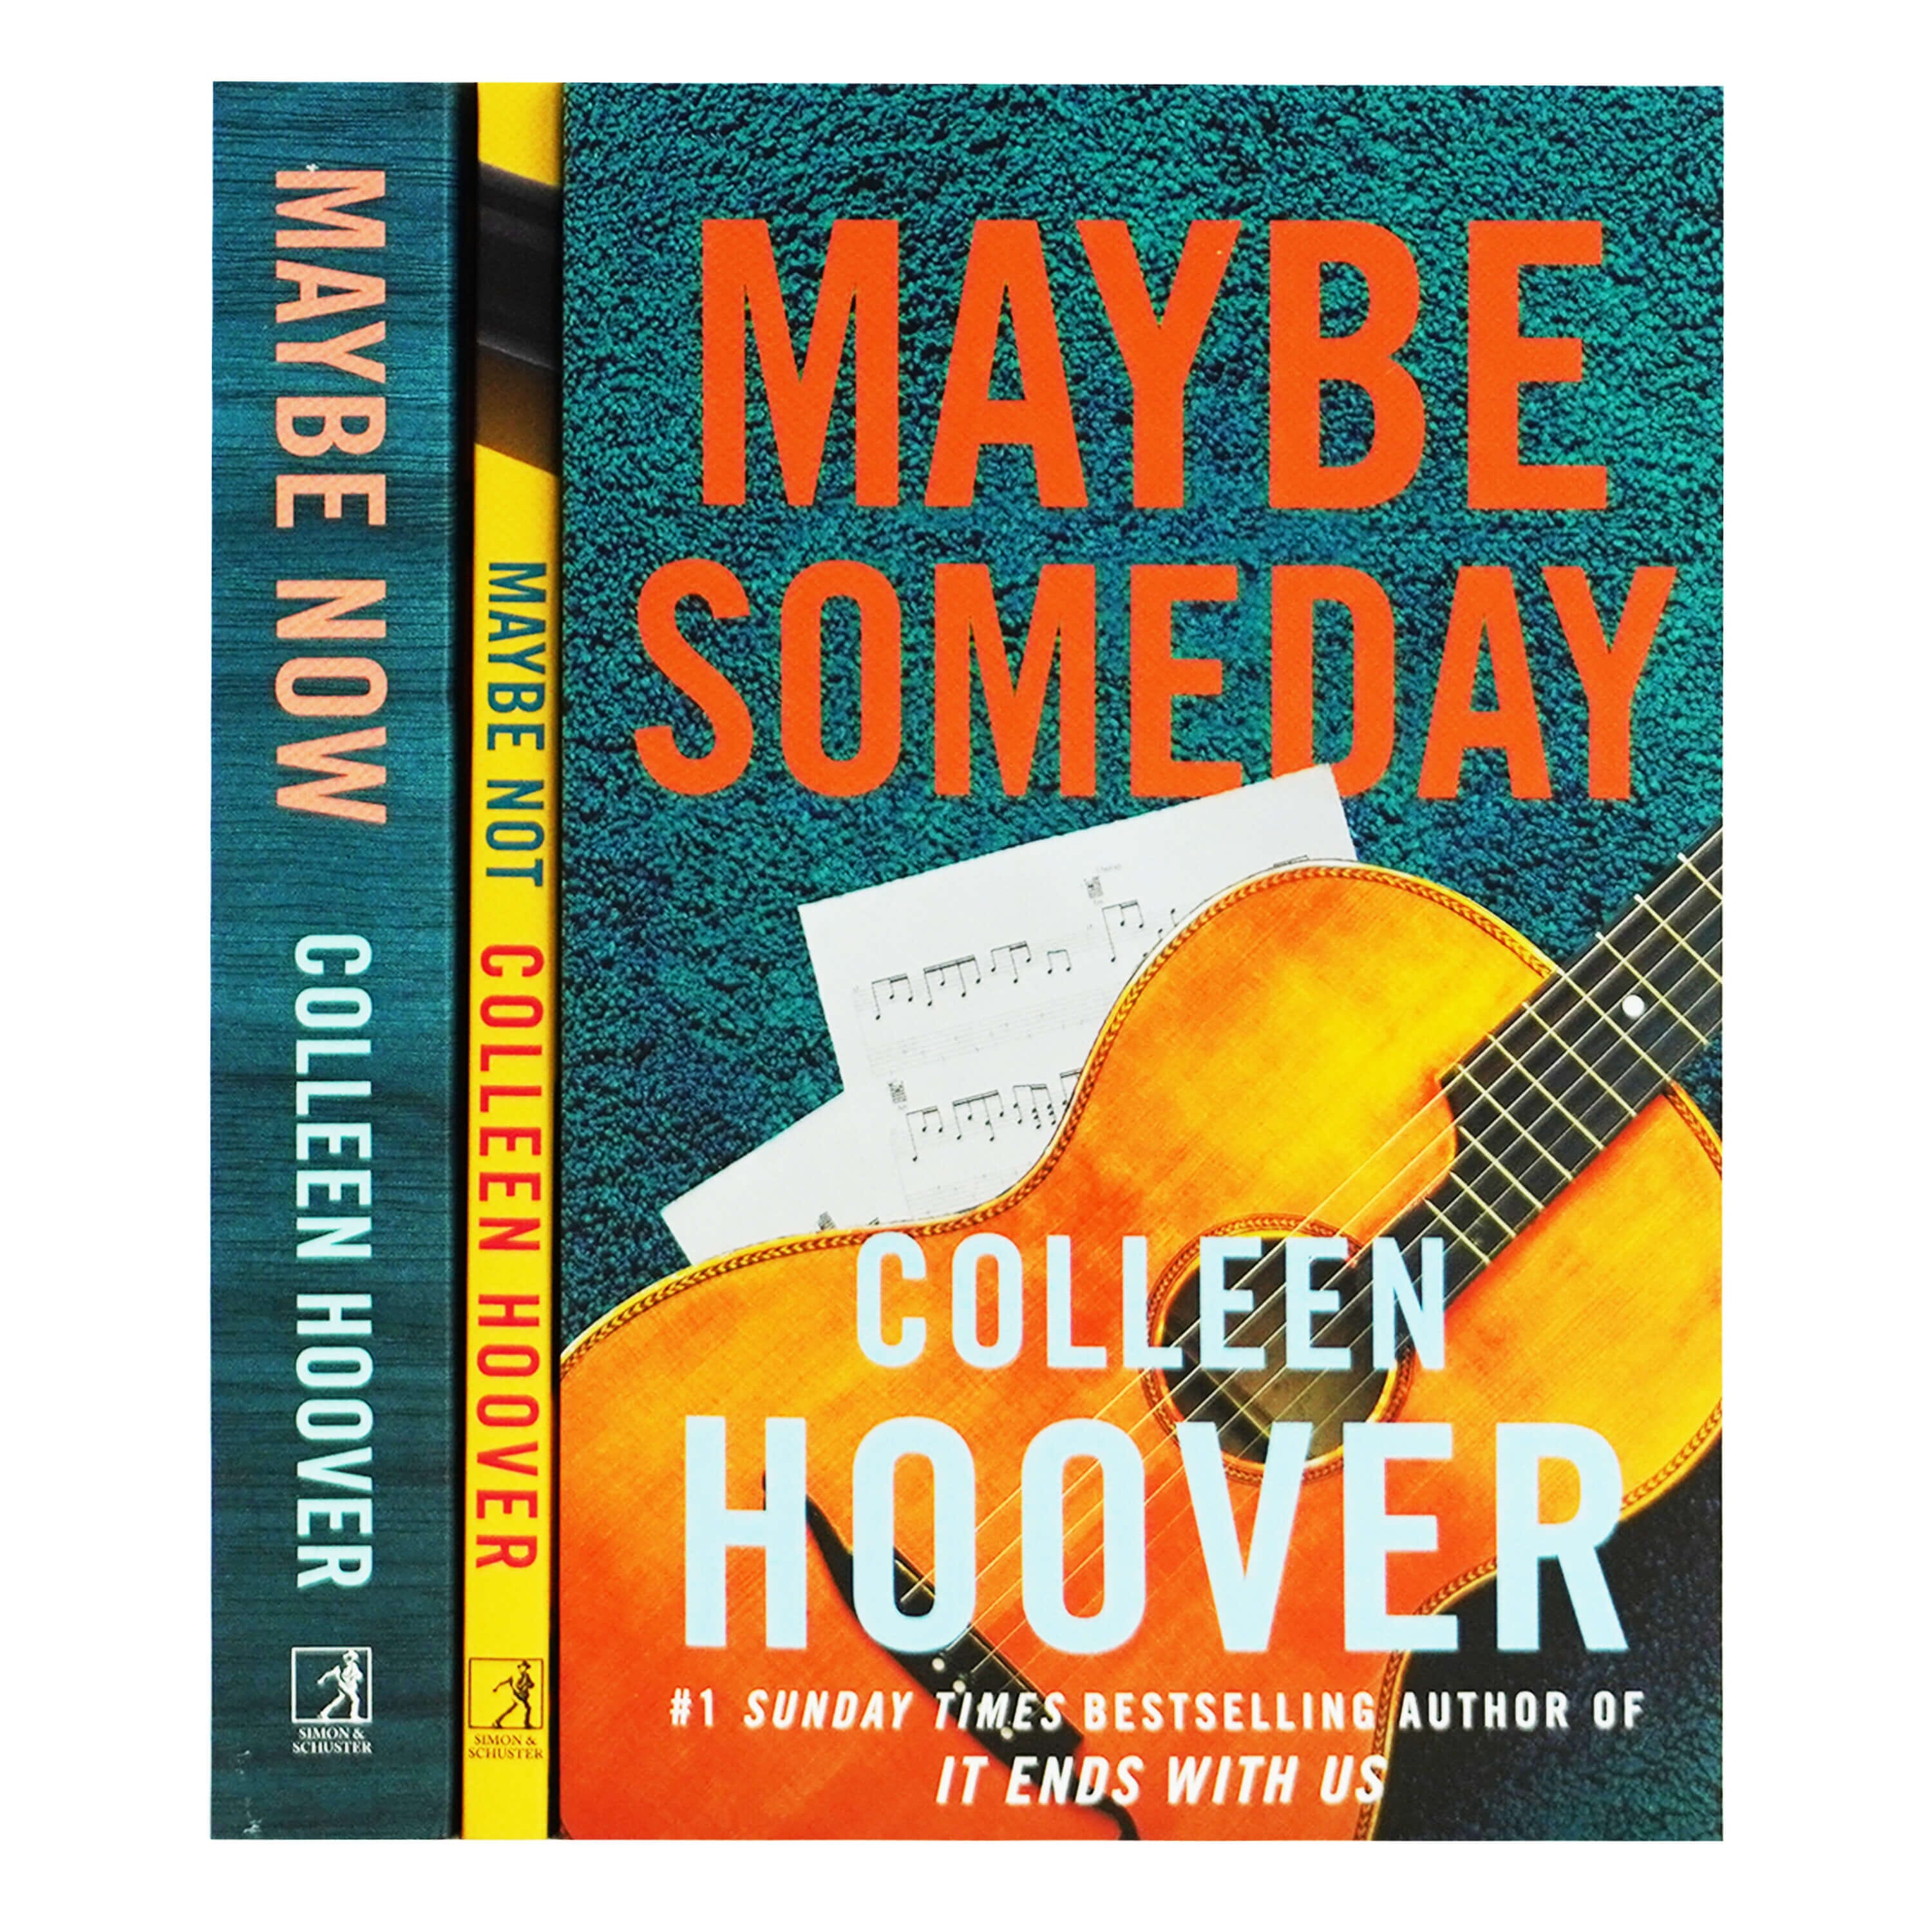 The Complete Collection Of Colleen Hoover Top 13 Books Set (Paperback,Brand  New)